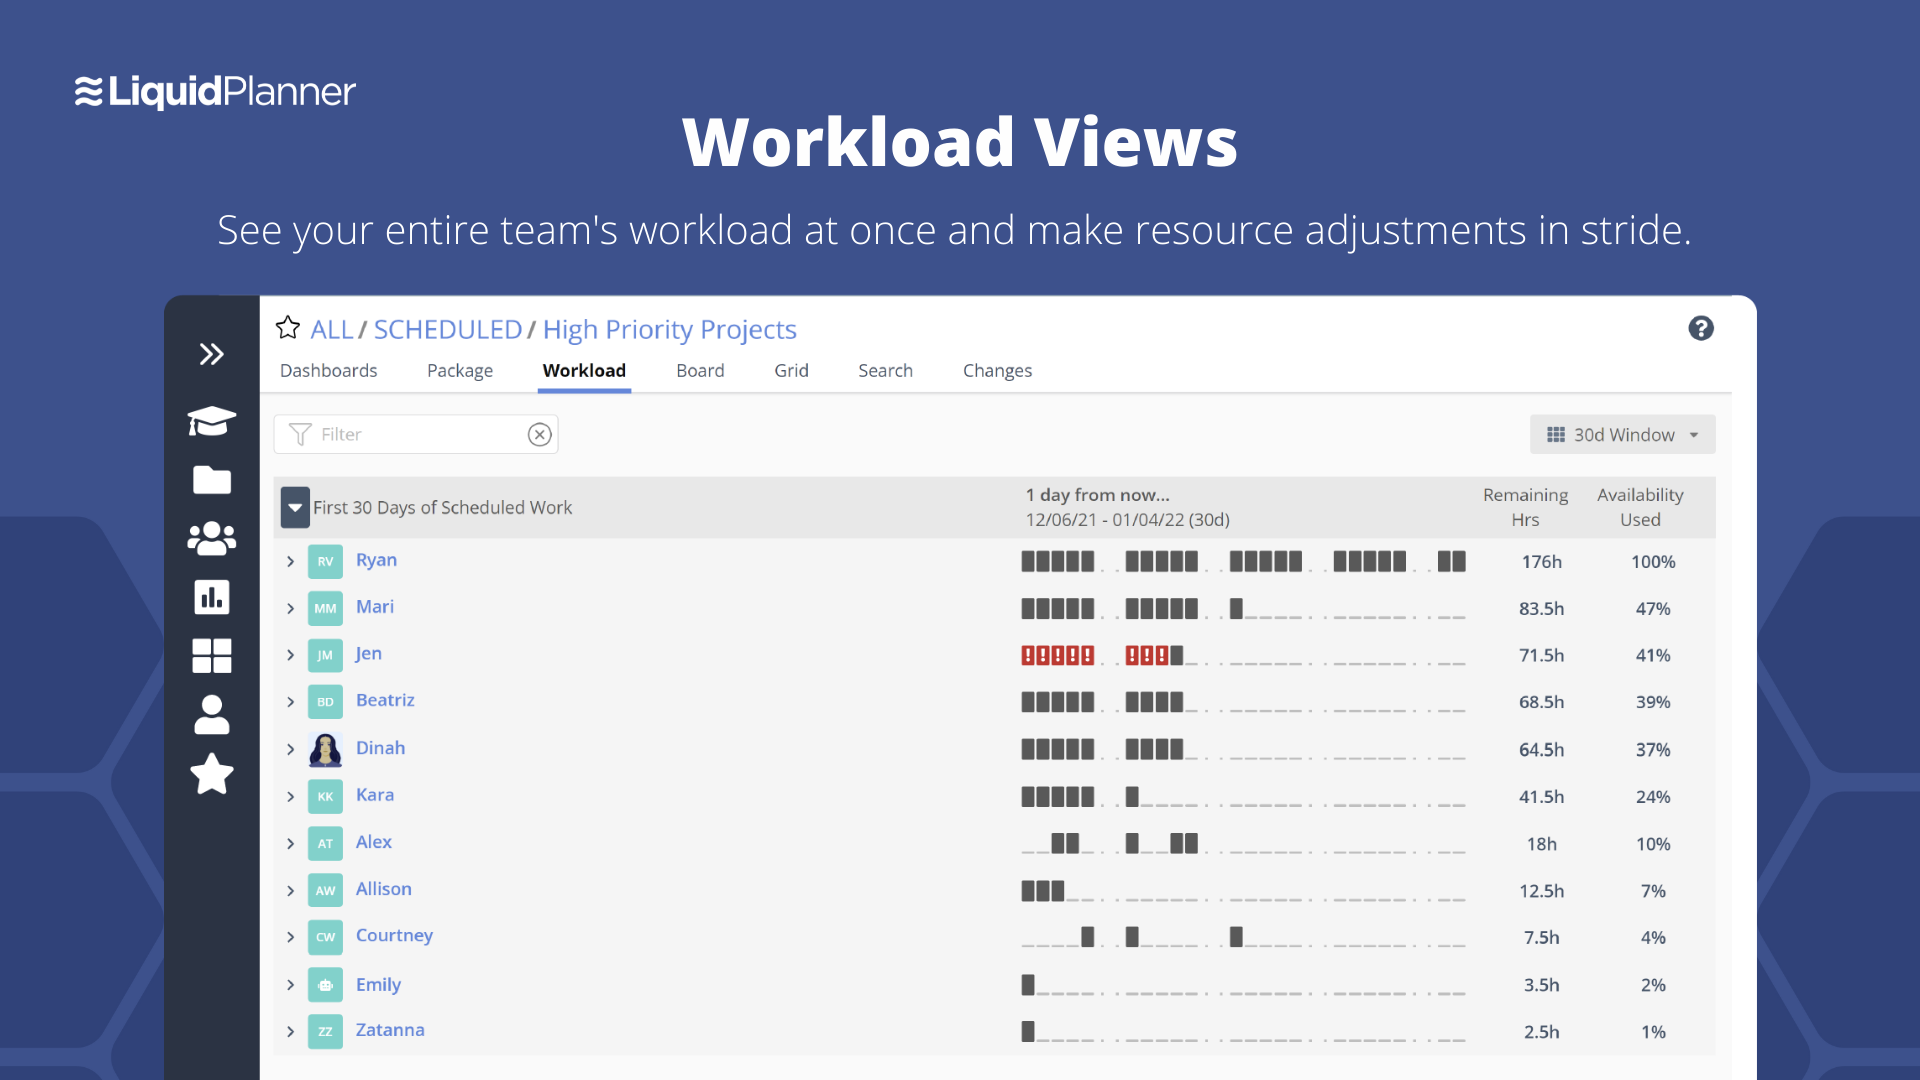 This view visualizes your entire team's workload, which is unique to LiquidPlanner. This allows you to see bottlenecks in the project before missed deadlines. Automatic resource leveling helps to ensure a balanced workload across the team.